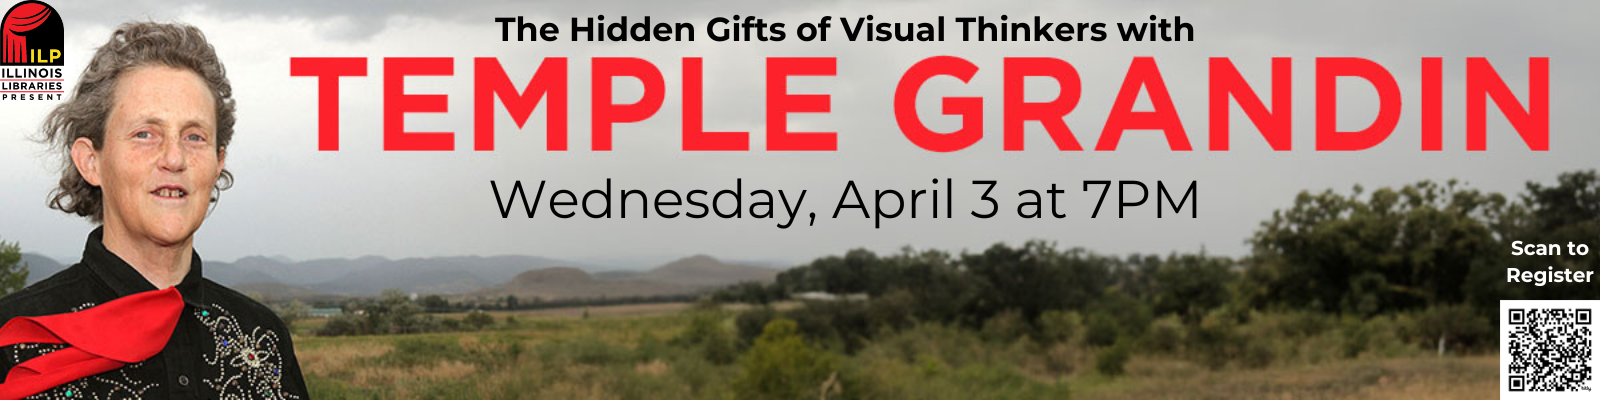 The Hidden Gifts of Visual Thinkers with Dr. Temple Grandin